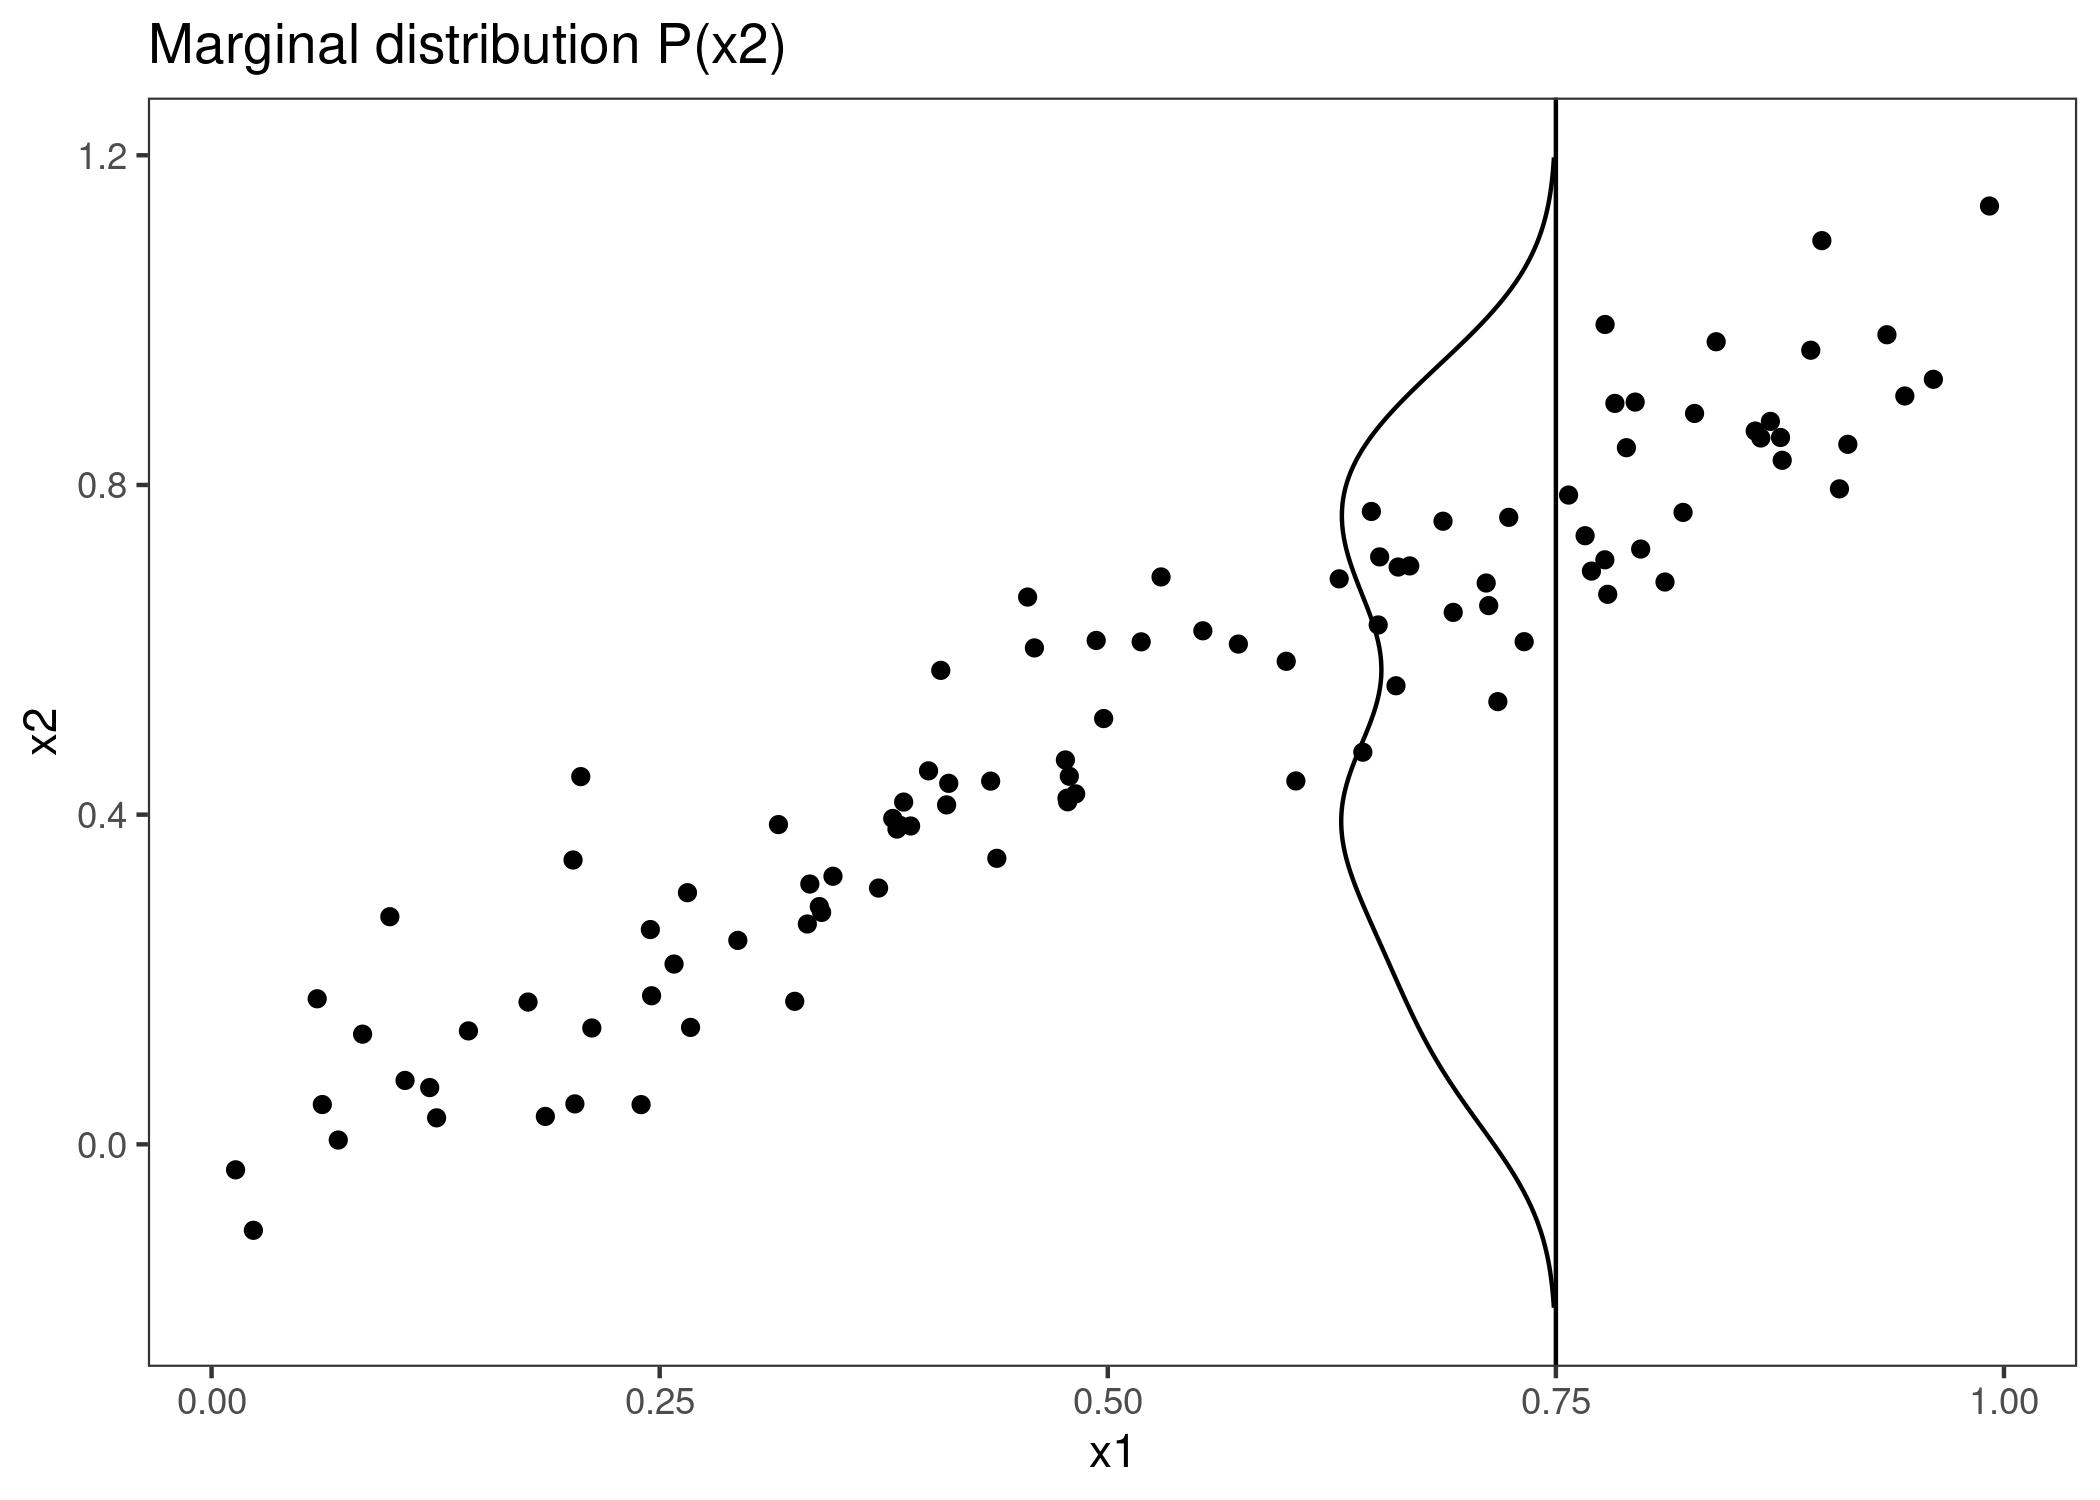 Strongly correlated features x1 and x2. To calculate the feature effect of x1 at 0.75, the PDP replaces x1 of all instances with 0.75, falsely assuming that the distribution of x2 at x1 = 0.75 is the same as the marginal distribution of x2 (vertical line). This results in unlikely combinations of x1 and x2 (e.g. x2=0.2 at x1=0.75), which the PDP uses for the calculation of the average effect.